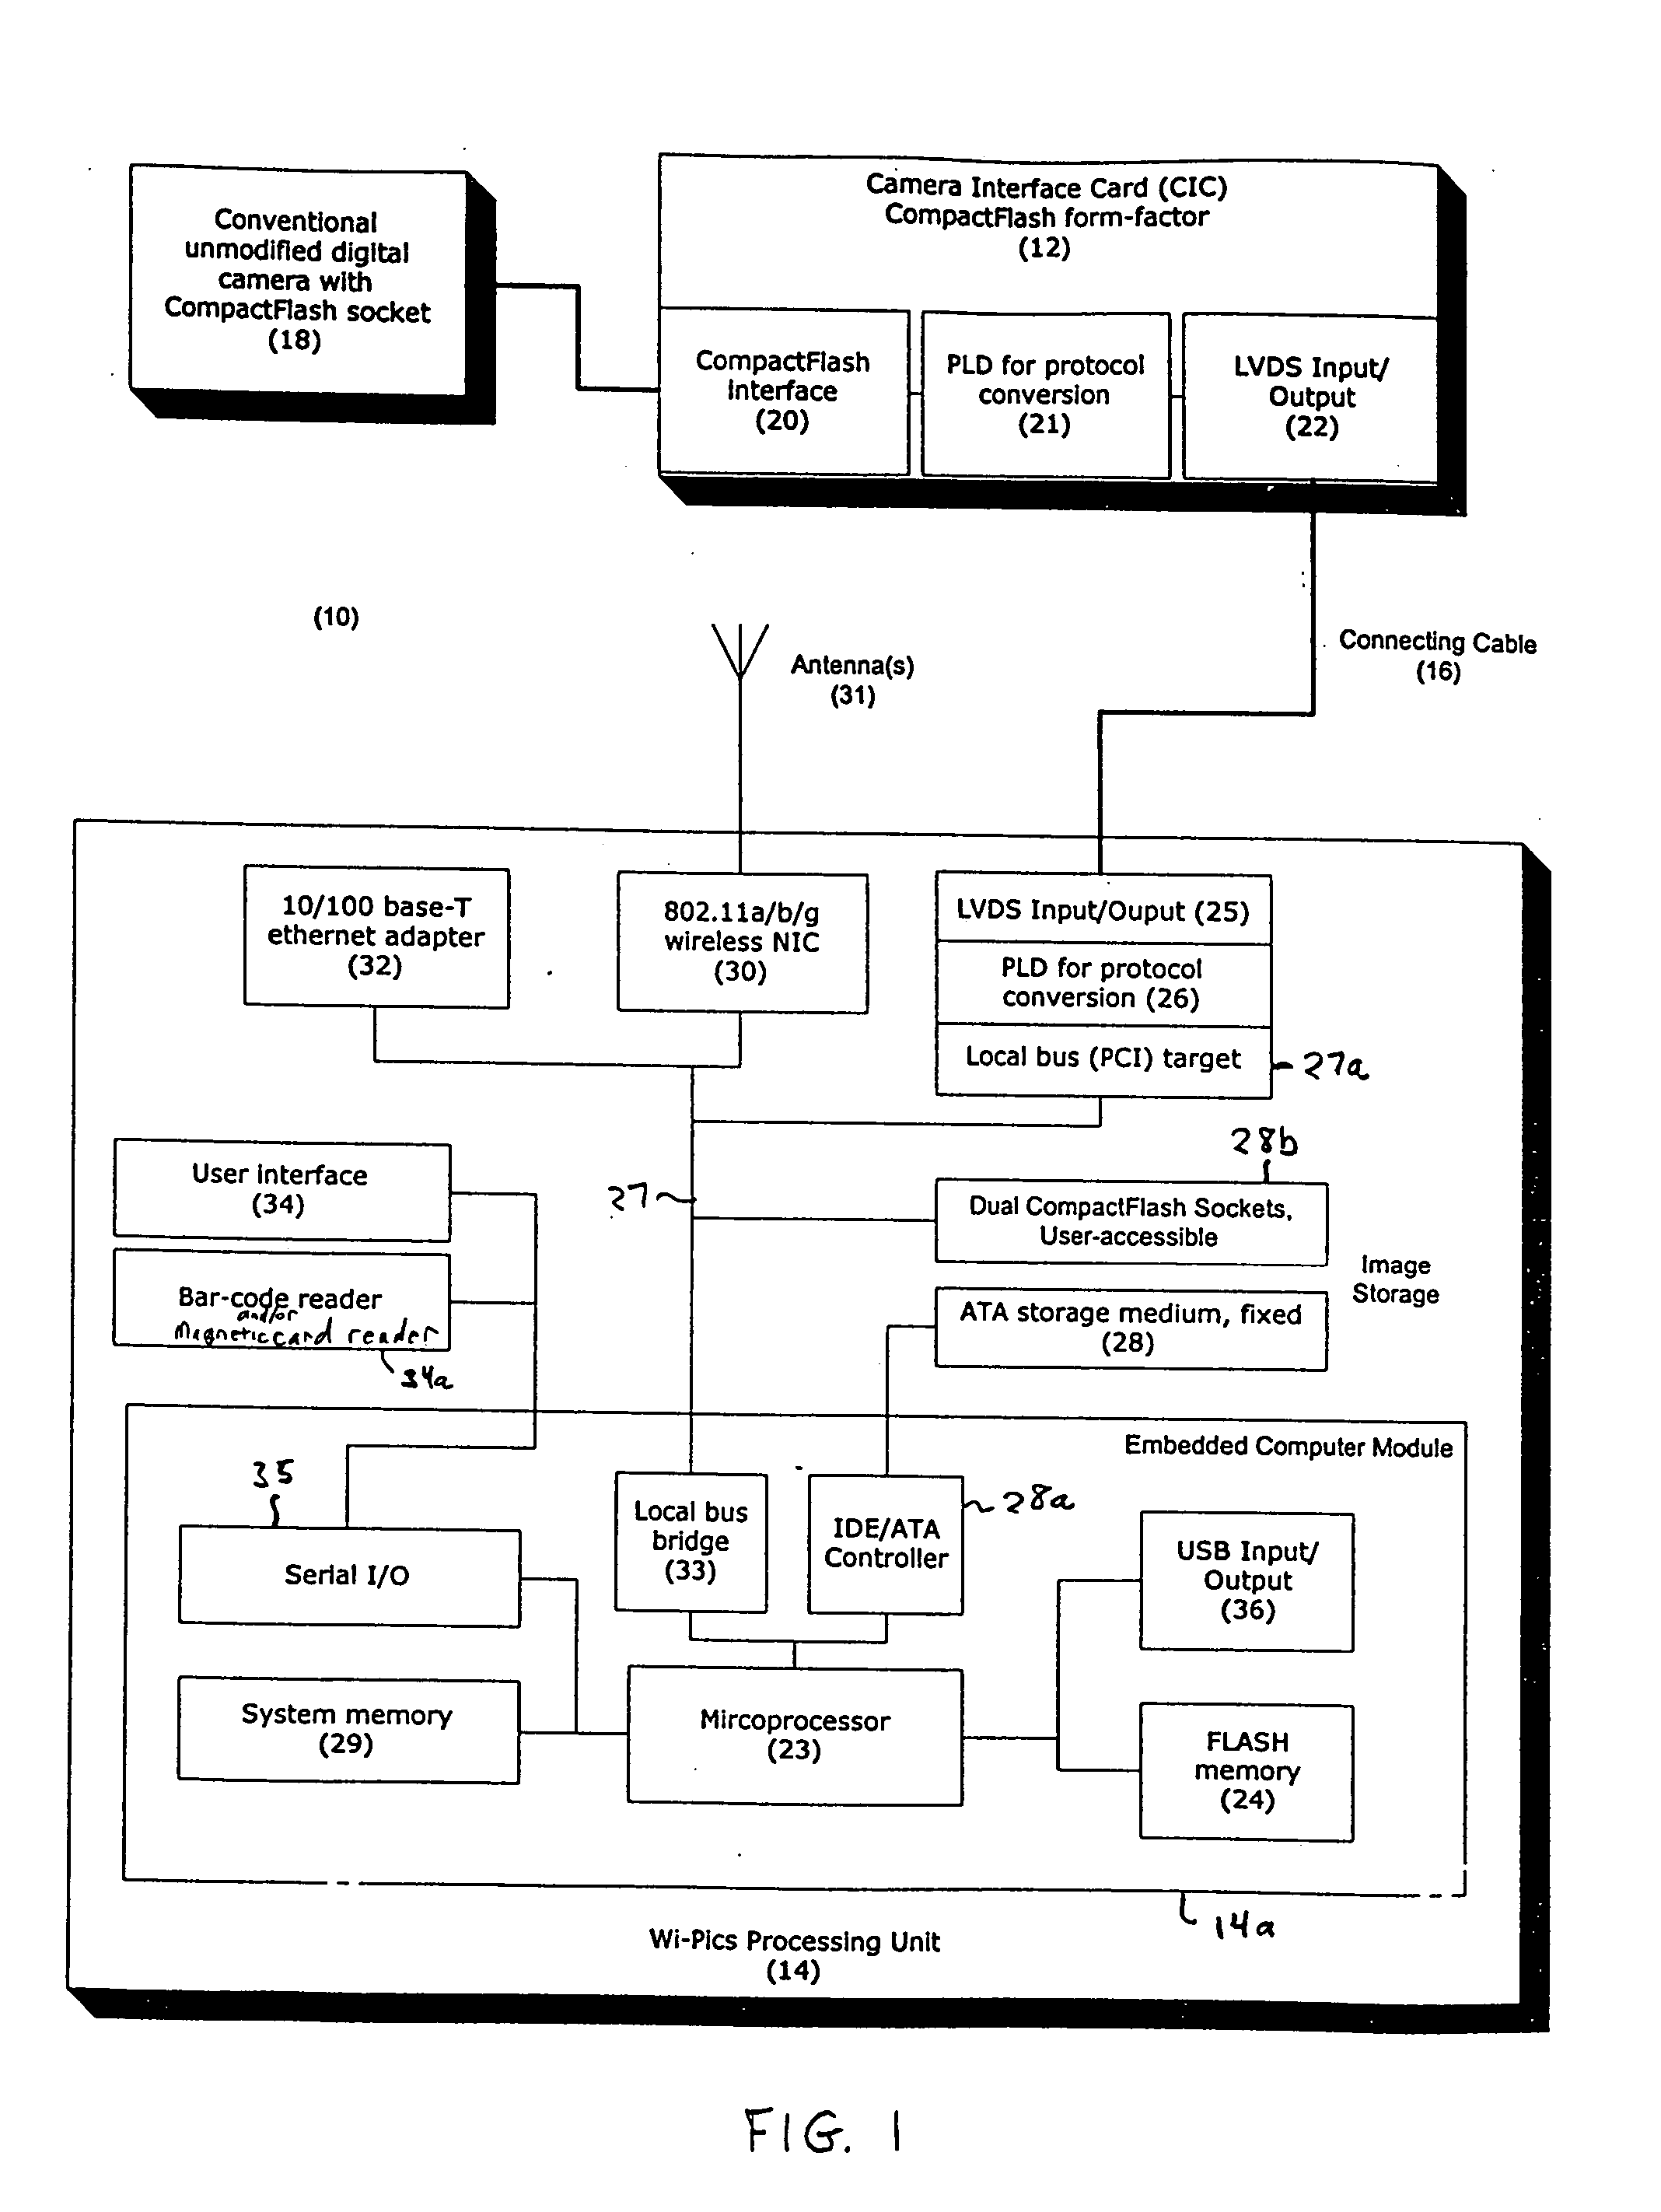 Apparatus for communicating over a network images captured by a digital camera